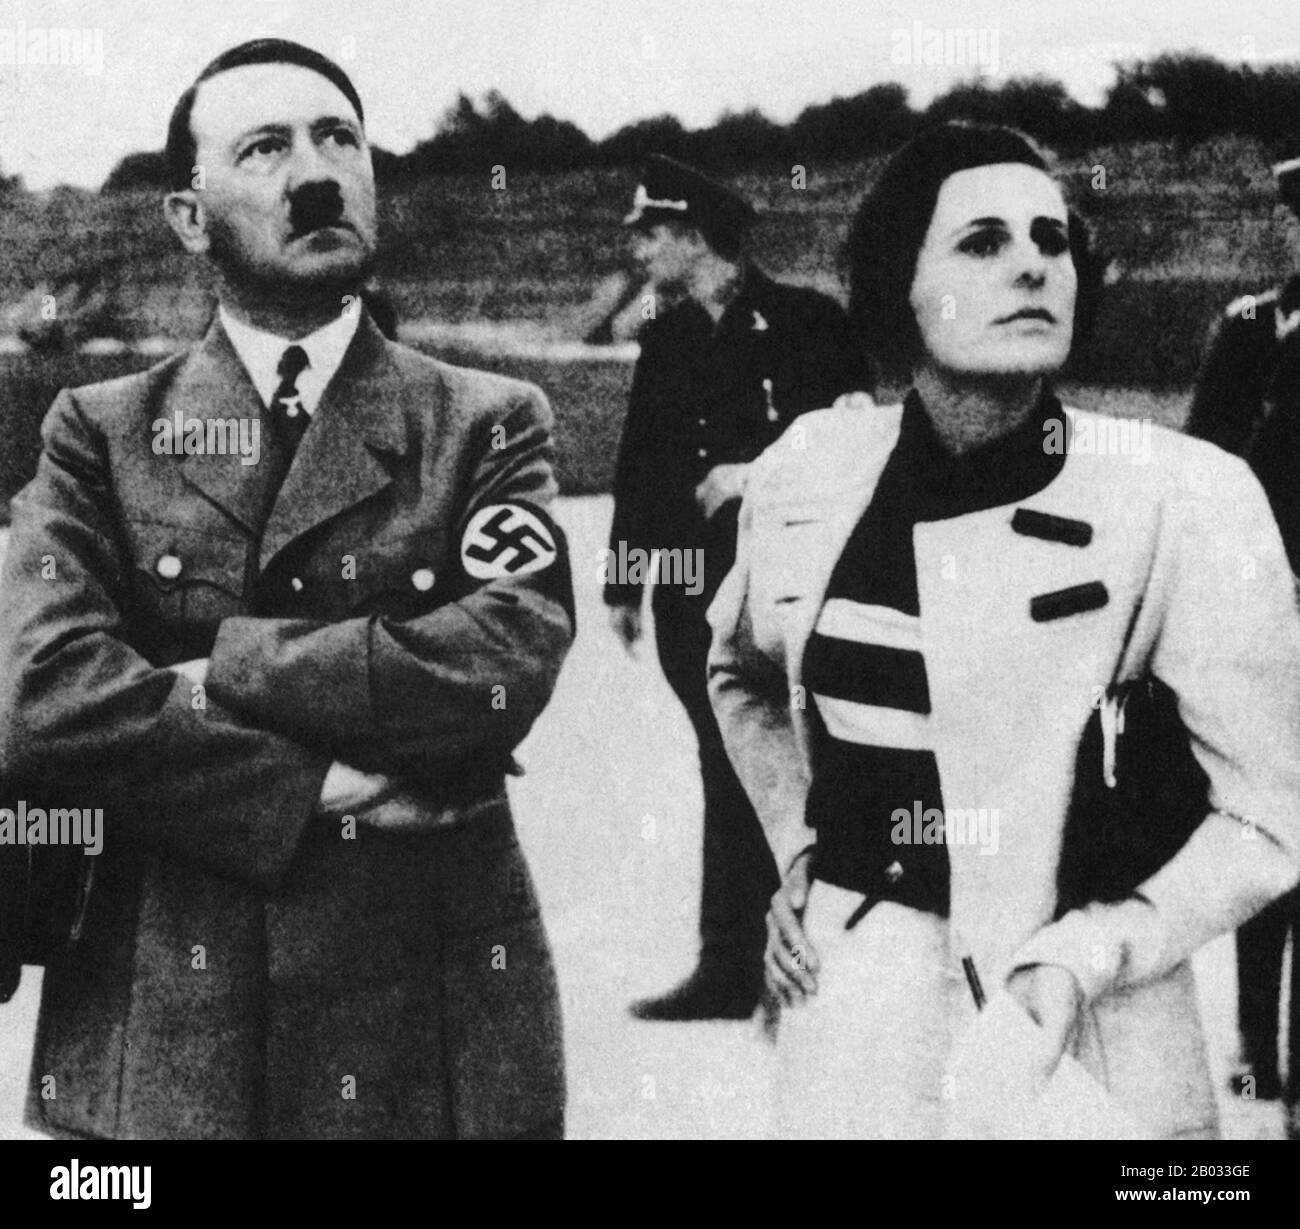 Helene Bertha Amalie 'Leni' Riefenstahl (22 August 1902 – 8 September 2003) was a German film director, producer, screenwriter, editor, photographer, actress, dancer, and propagandist for the Nazis.  Adolf Hitler (20 April 1889 – 30 April 1945) was a German politician of Austrian origin who was the leader of the Nazi Party (NSDAP), Chancellor of Germany from 1933 to 1945, and Fuhrer ('leader') of Nazi Germany from 1934 to 1945.  As dictator of Nazi Germany he initiated World War II in Europe and was a central figure of the Holocaust. Stock Photo